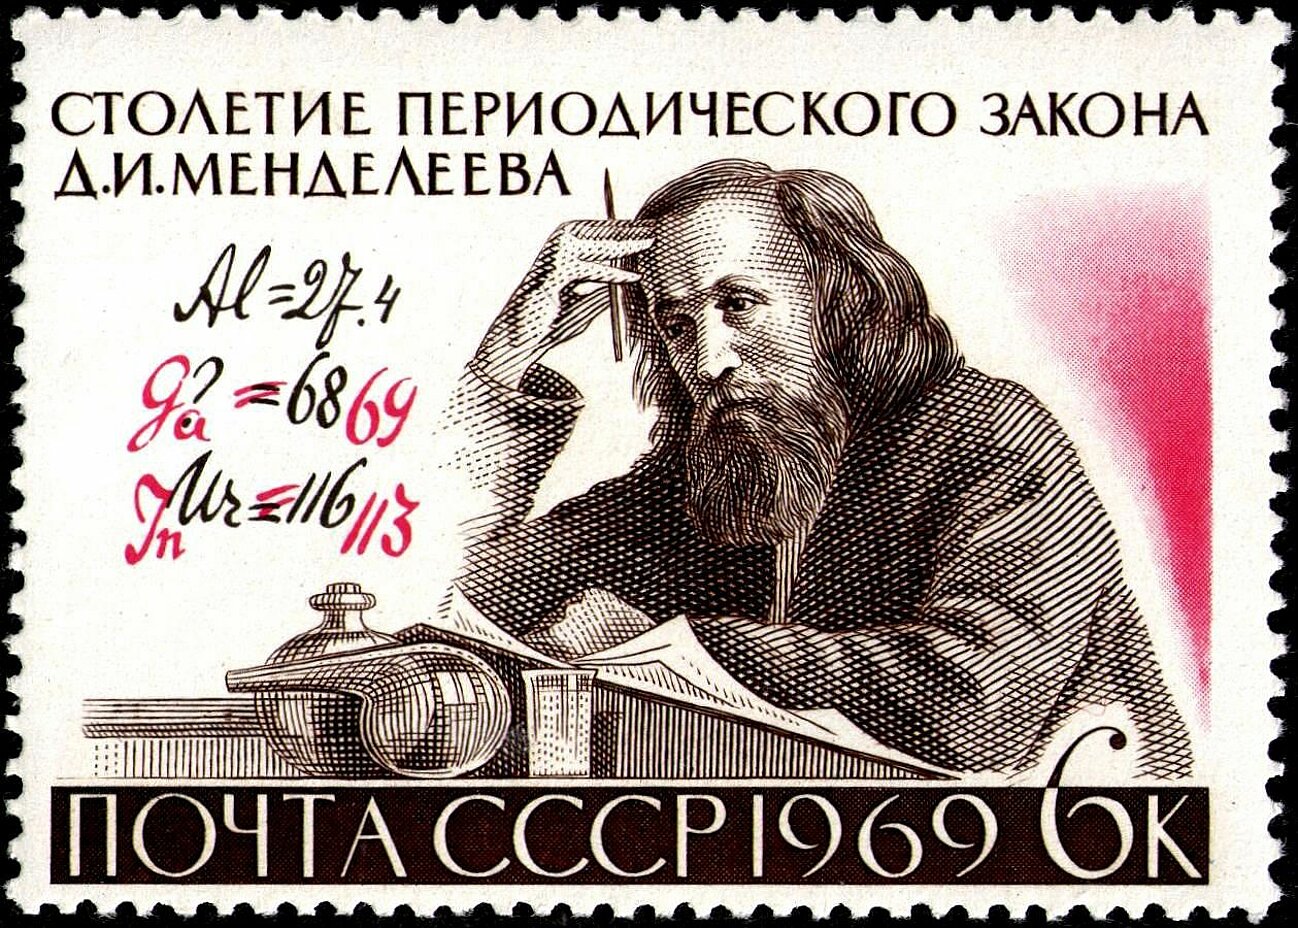 The_Soviet_Union_1969_CPA_3761_stamp__Mendeleev_and_Formula_